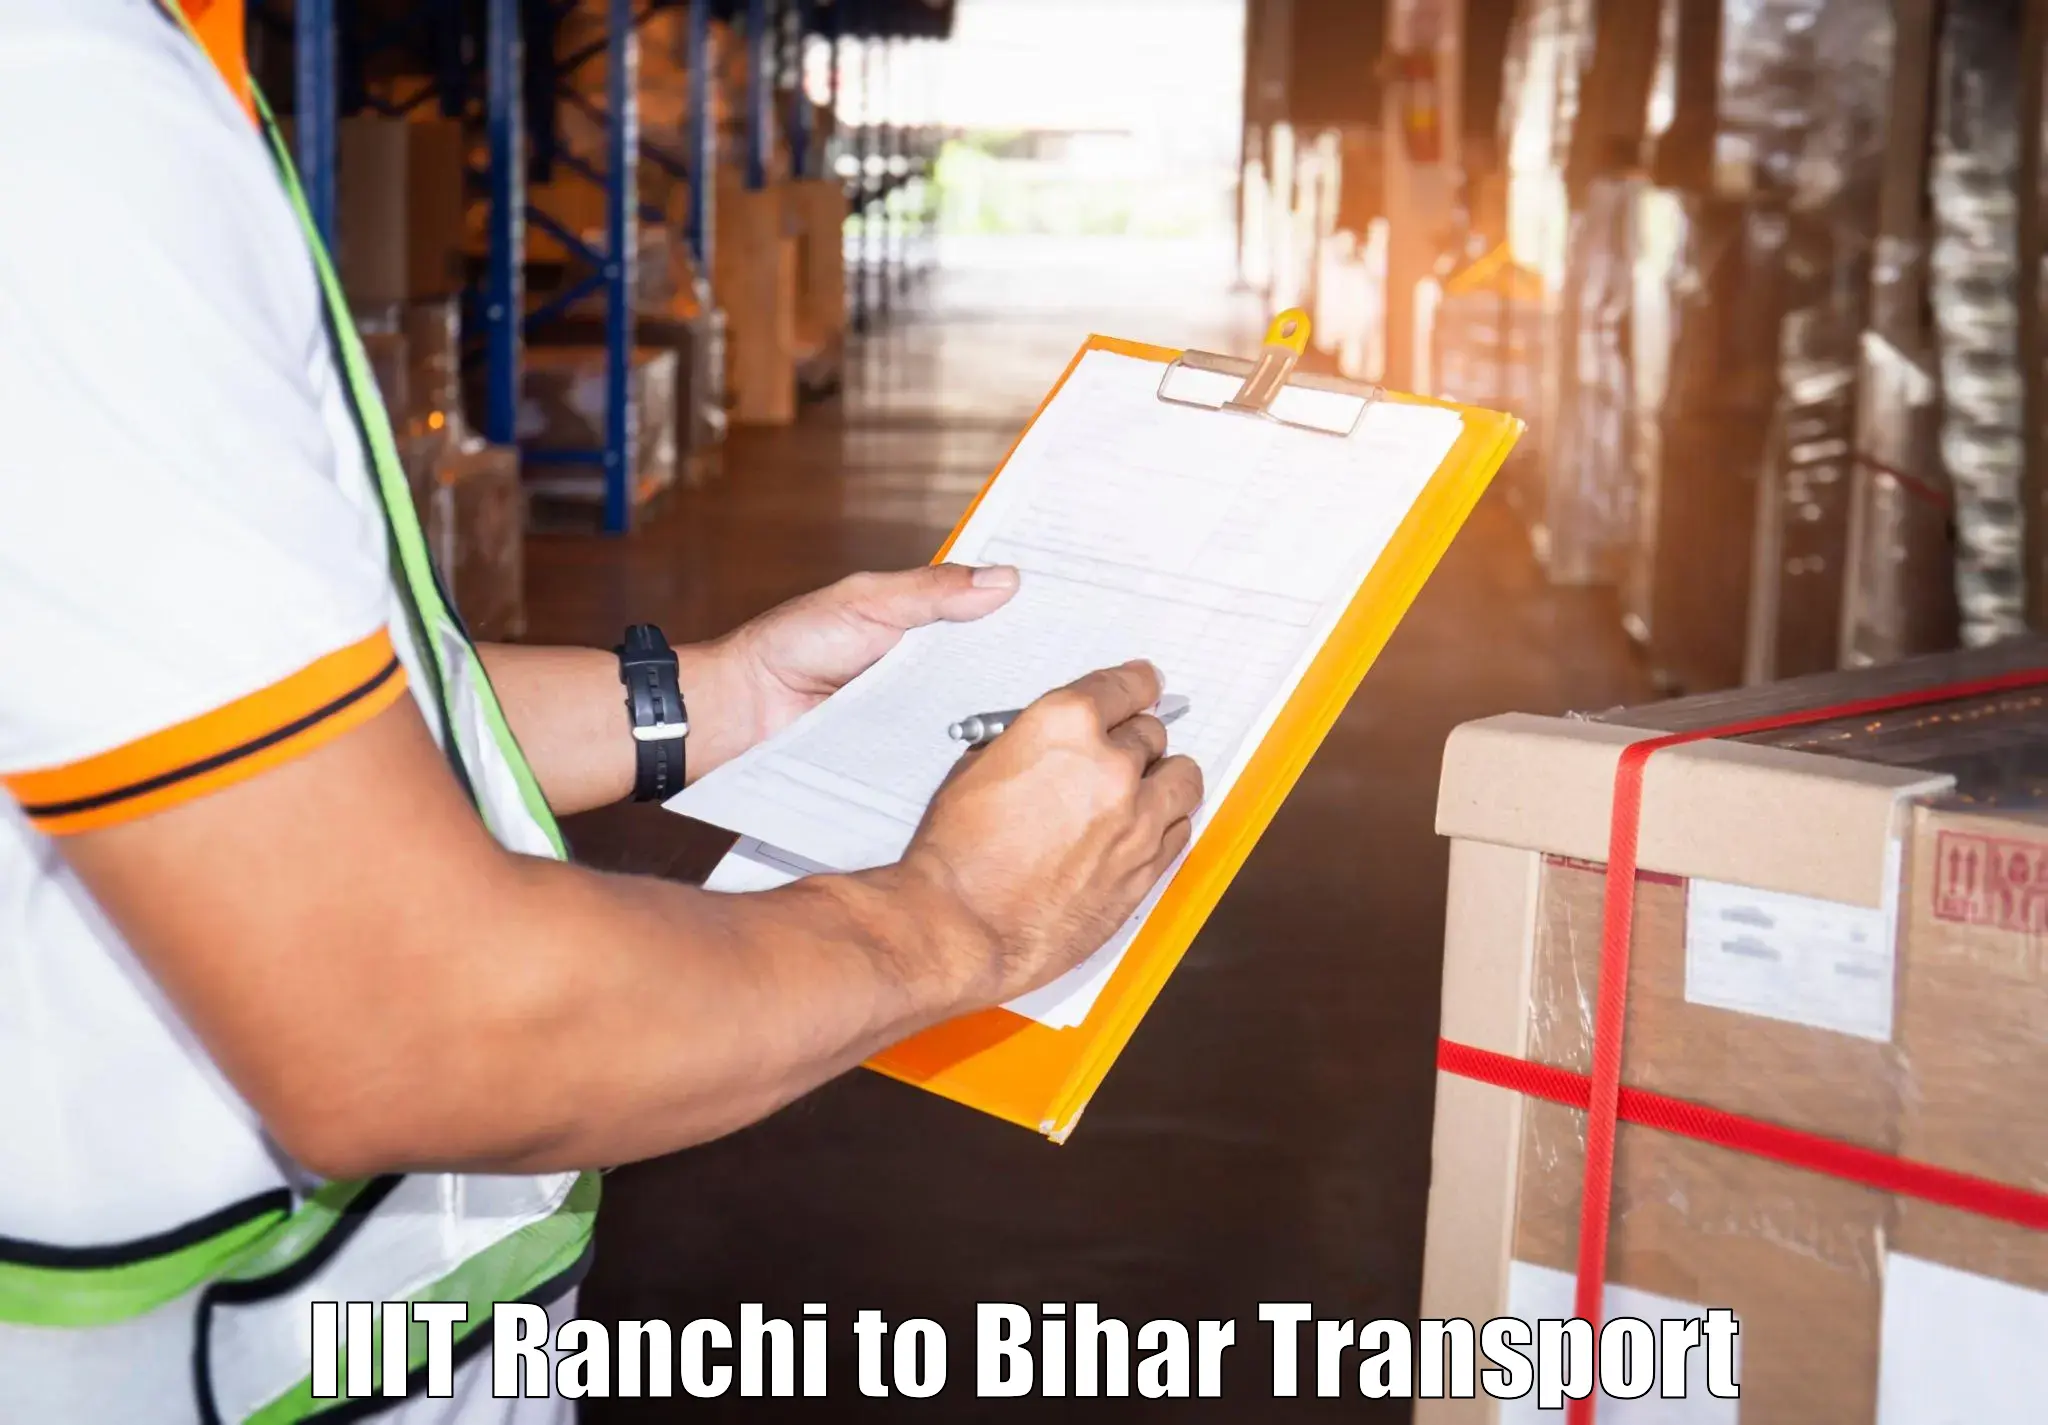 Container transport service IIIT Ranchi to Forbesganj